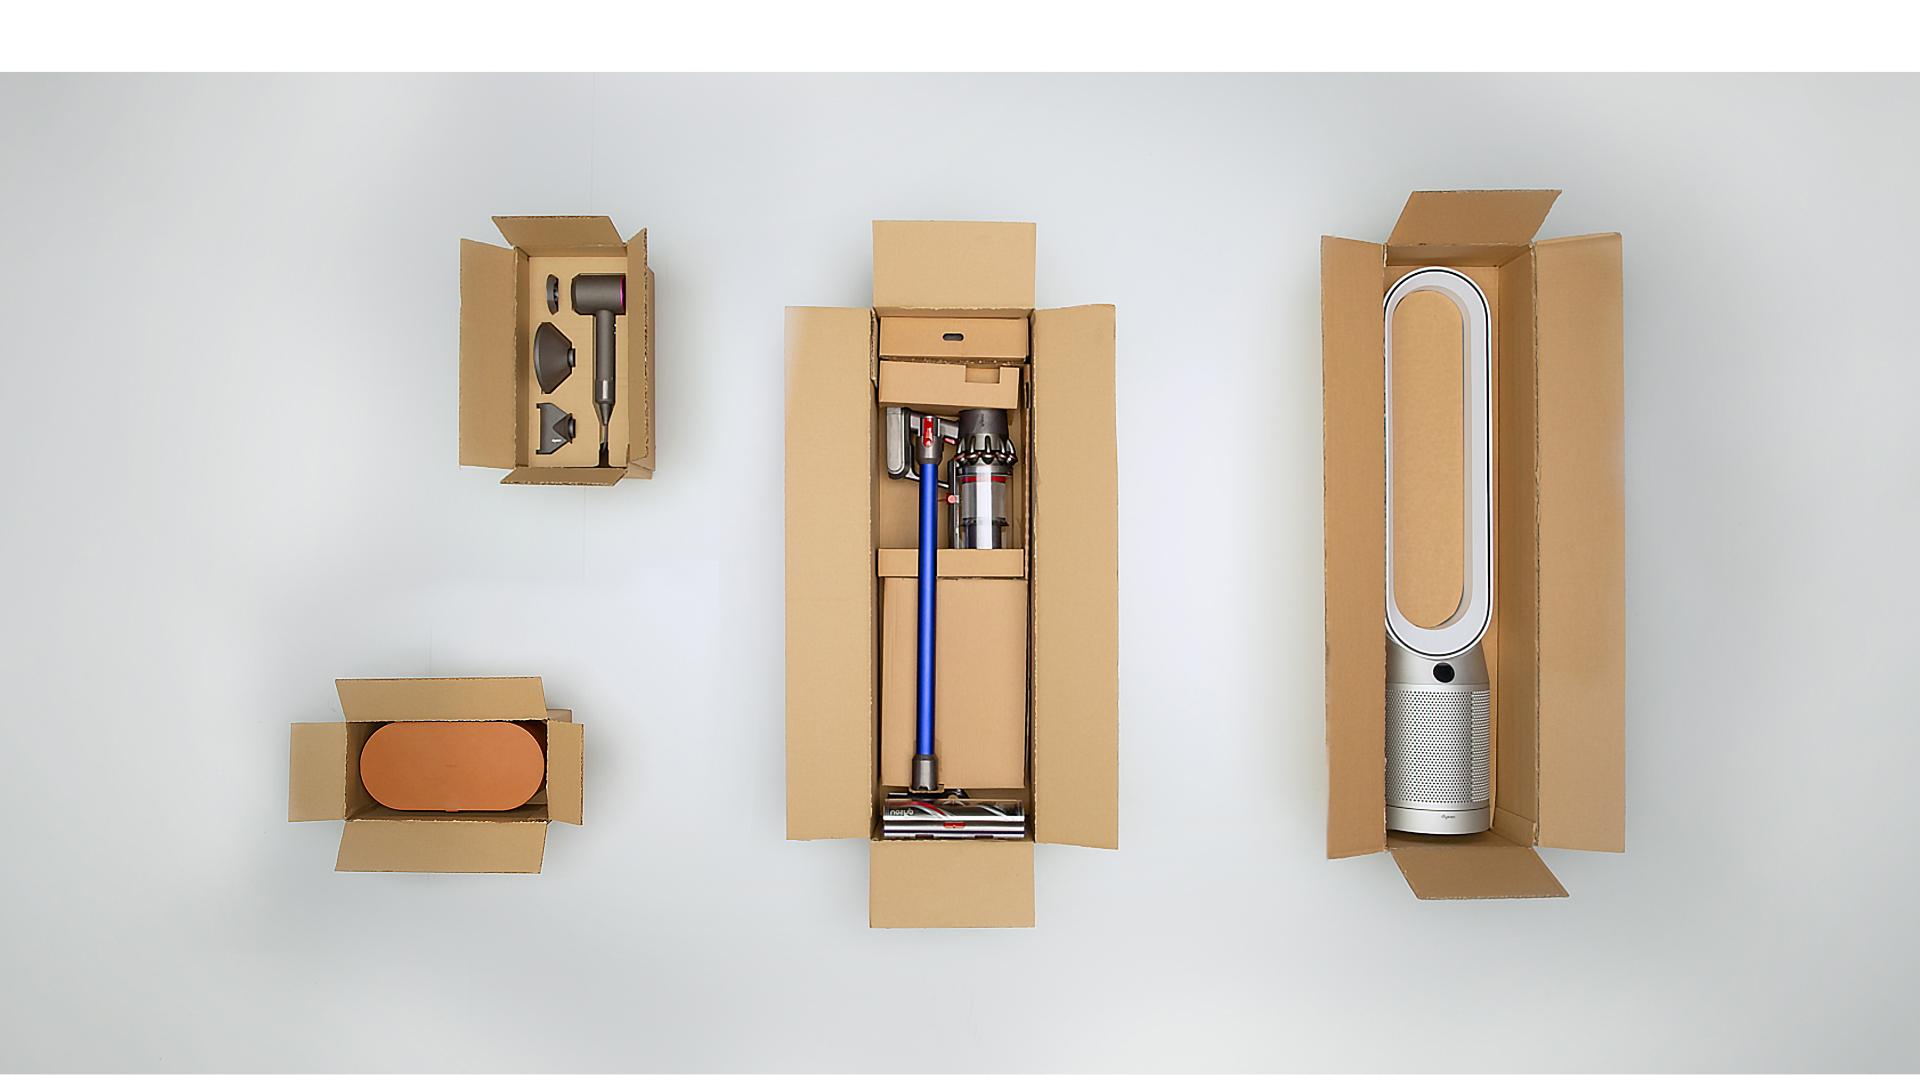 Refurbished Dyson machines in brand-new recyclable packaging.